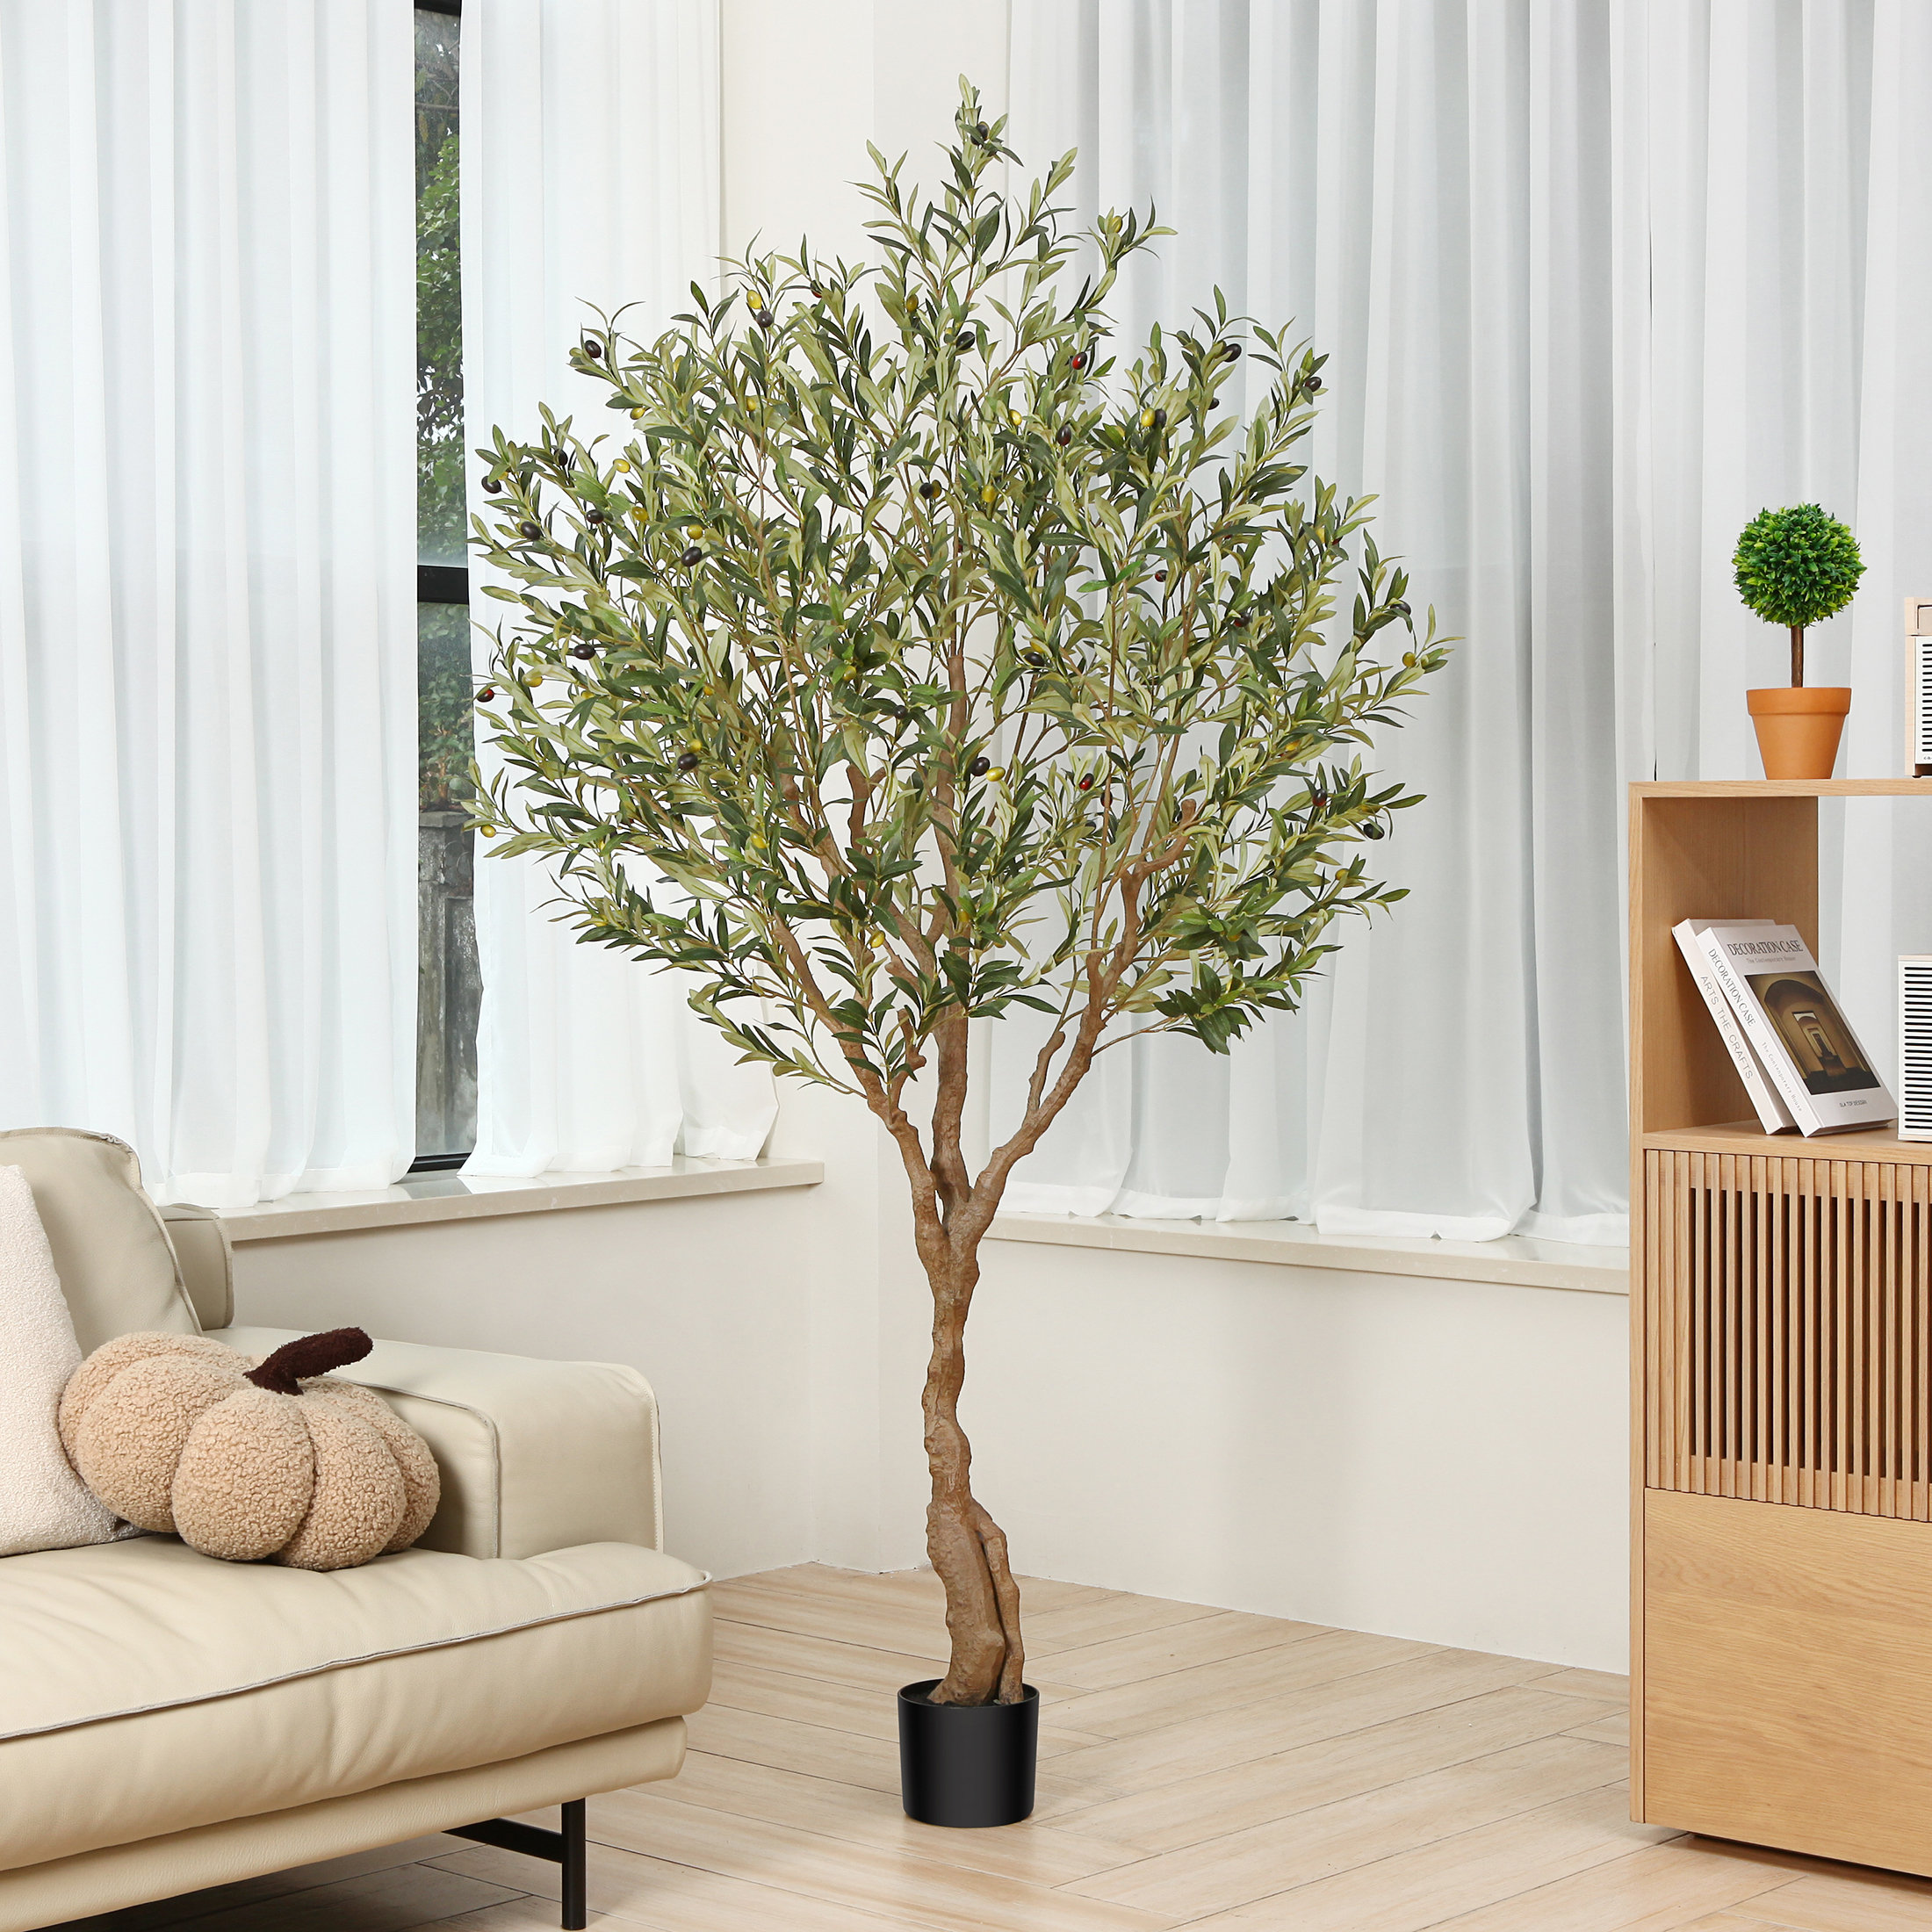 7 Ft Faux Mediterranean Olive Tree - Fake Green Trees